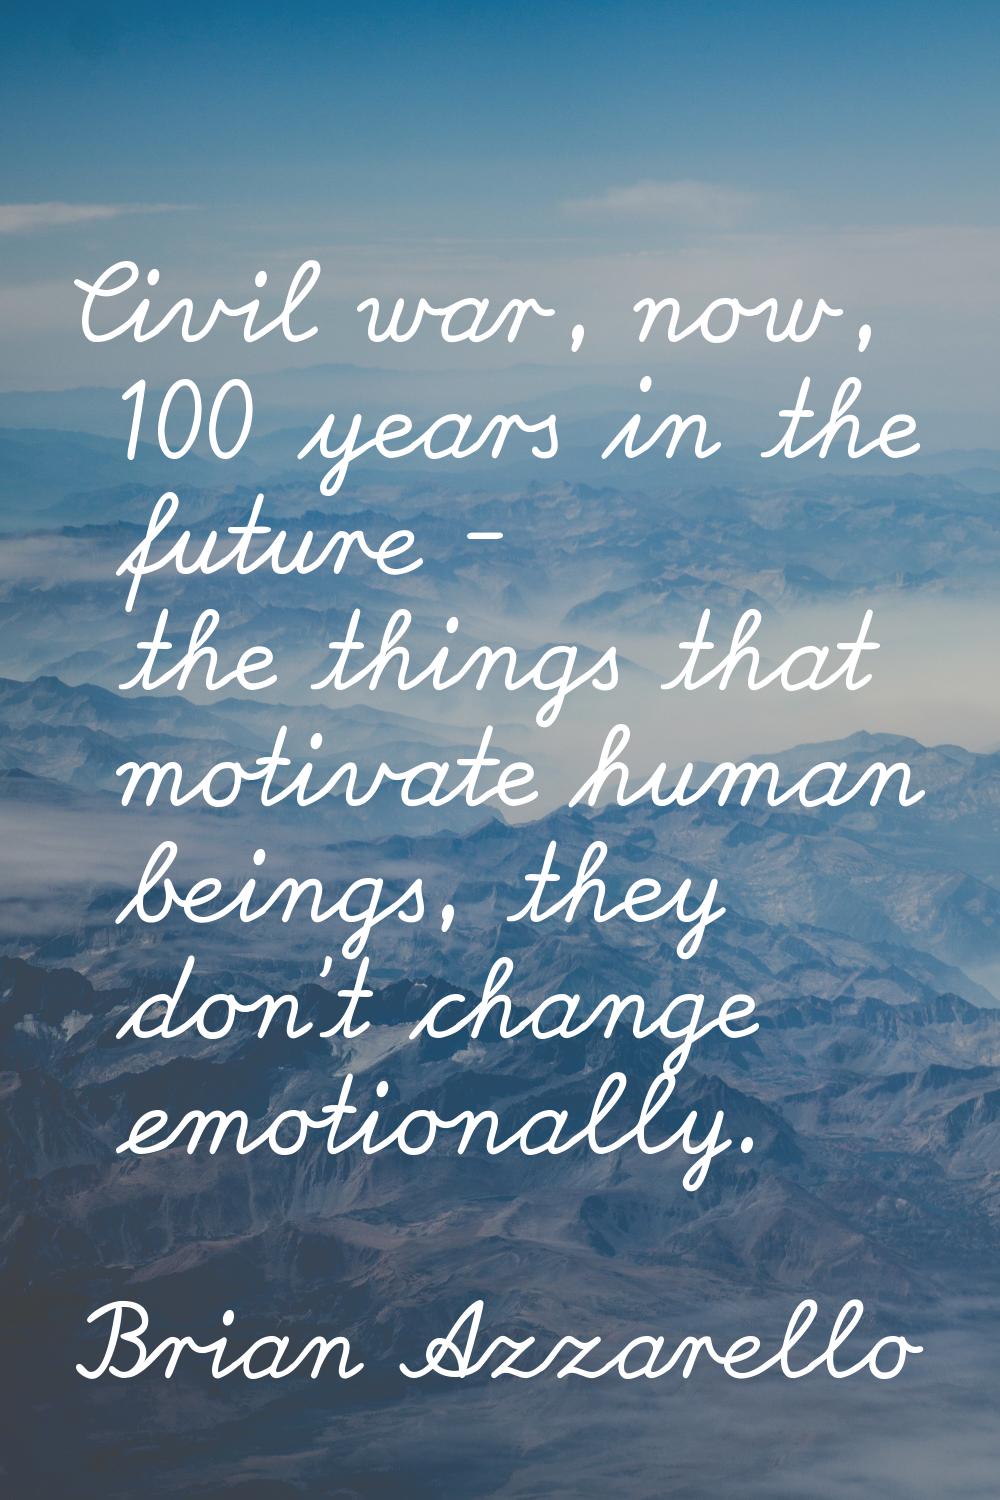 Civil war, now, 100 years in the future - the things that motivate human beings, they don't change 